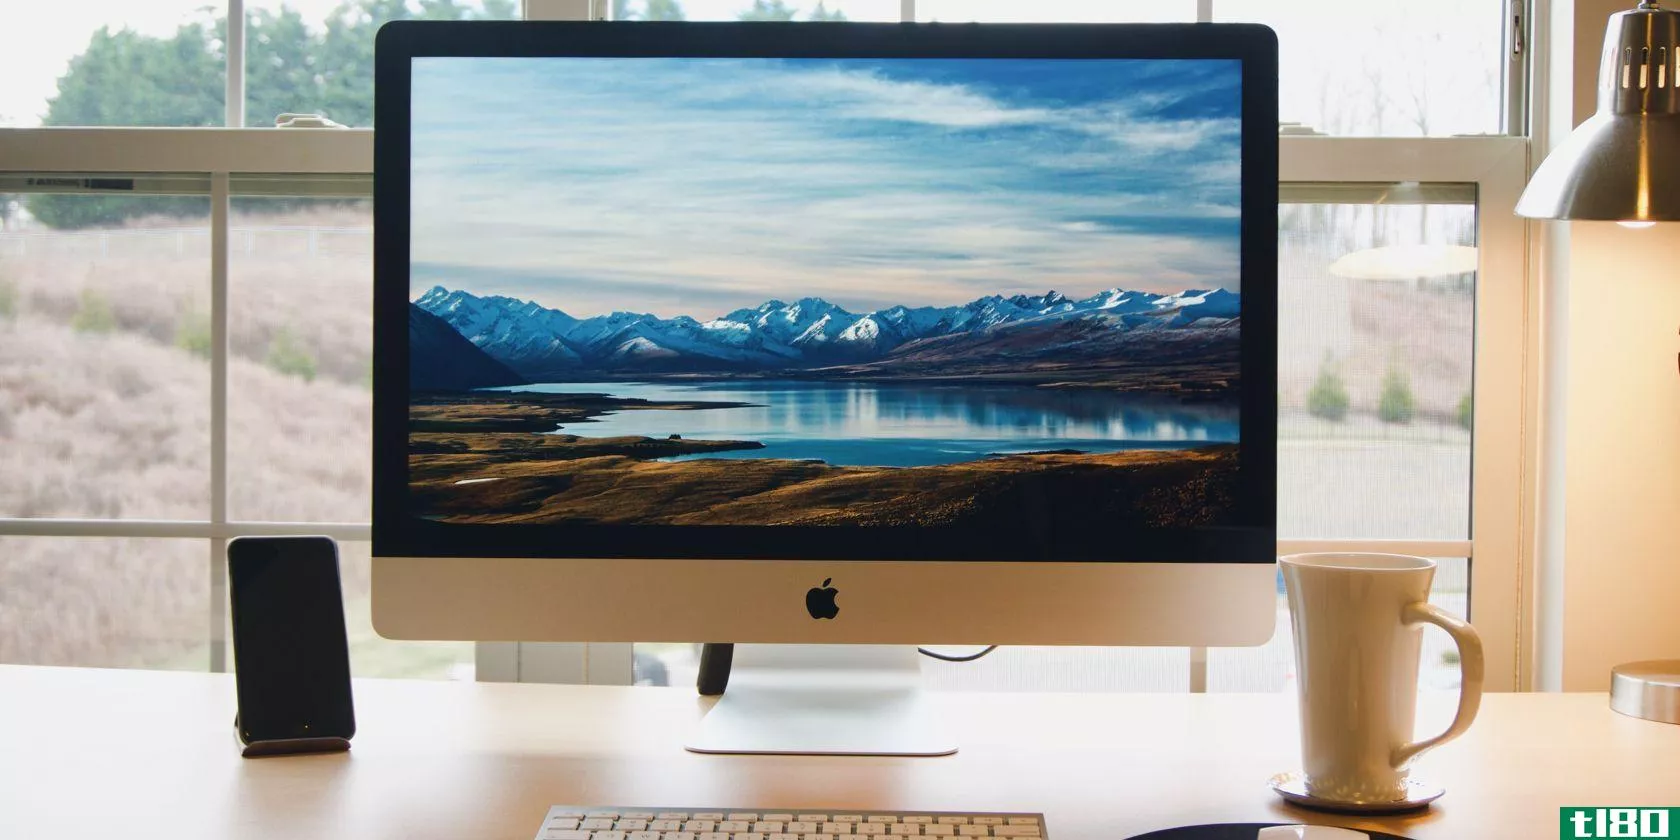 A photograph of an iMac sitting in front of a window framing a picturesque scene